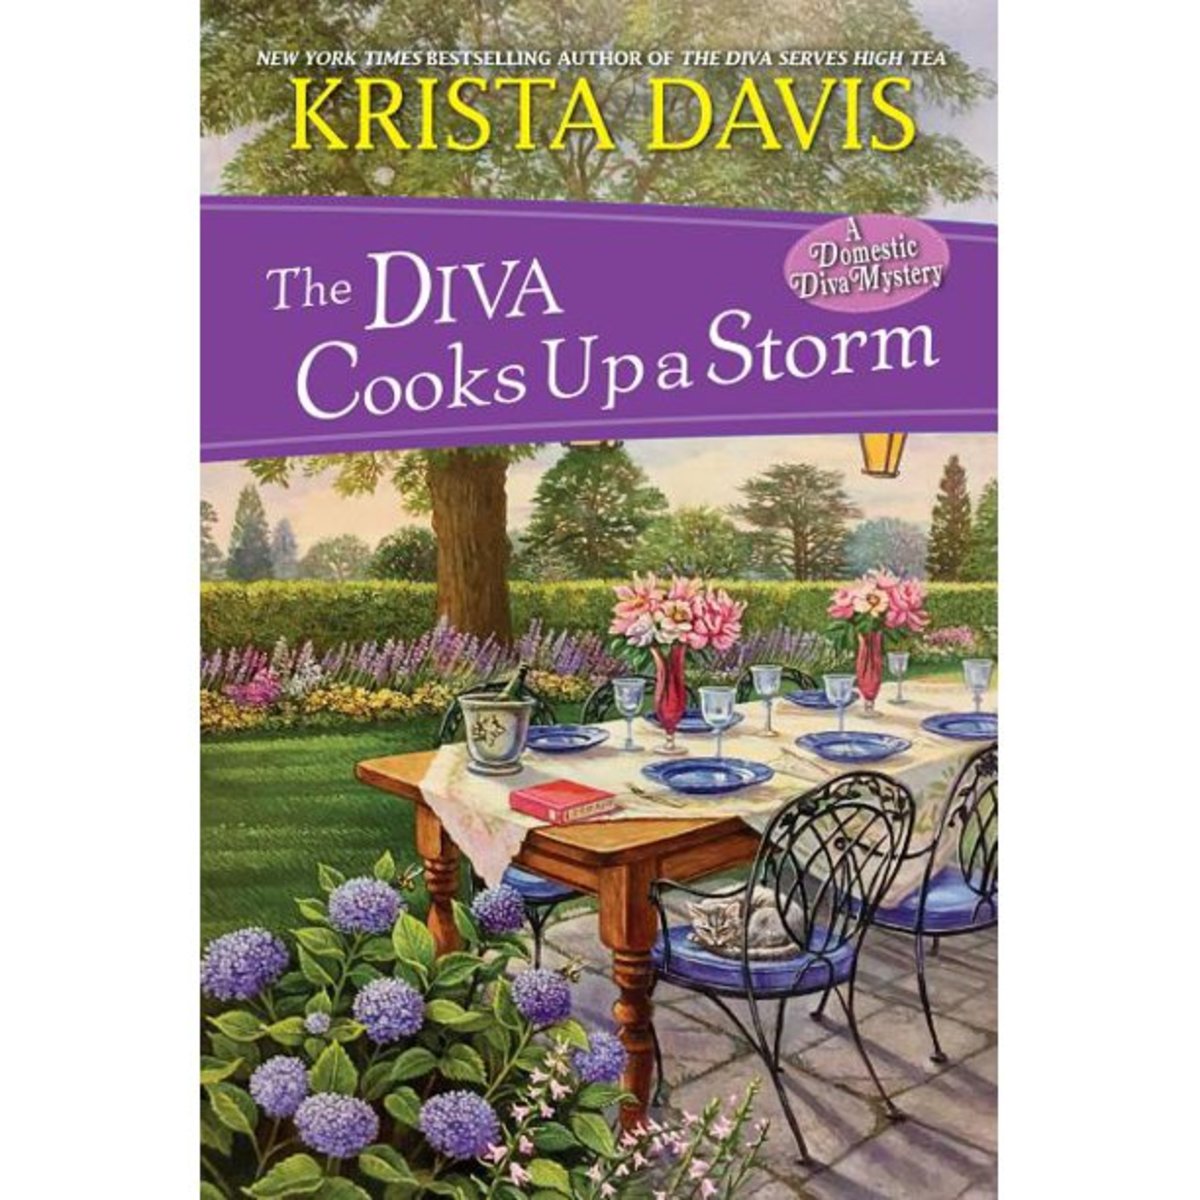 Book Review: The Diva Cooks Up a Storm by Krista Davis